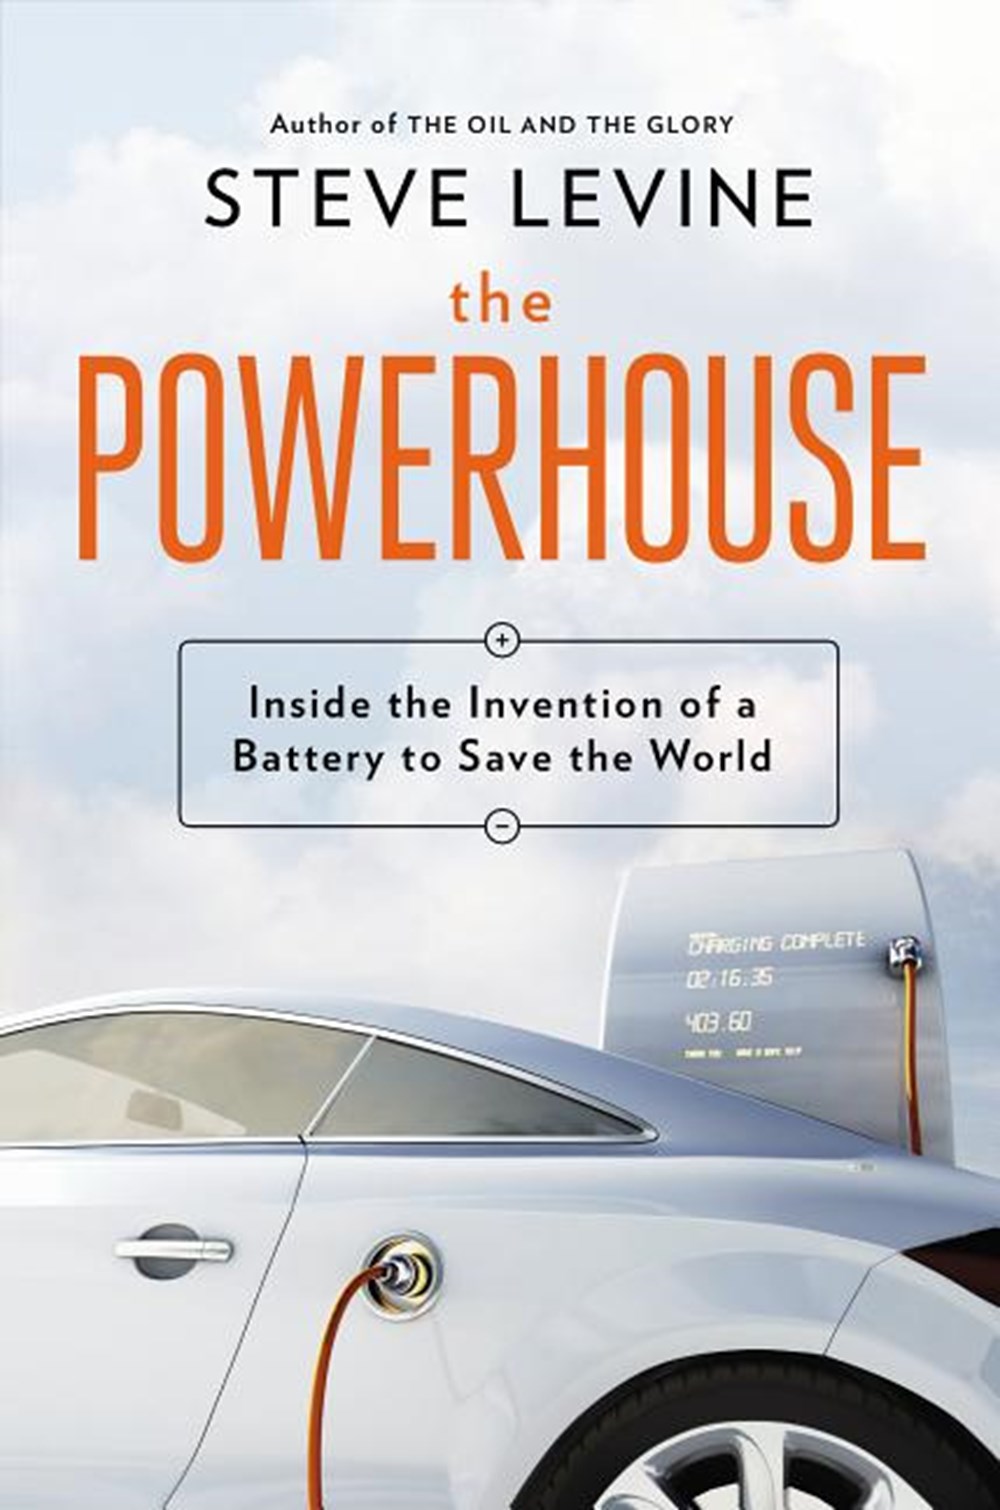 Powerhouse: Inside the Invention of a Battery to Save the World